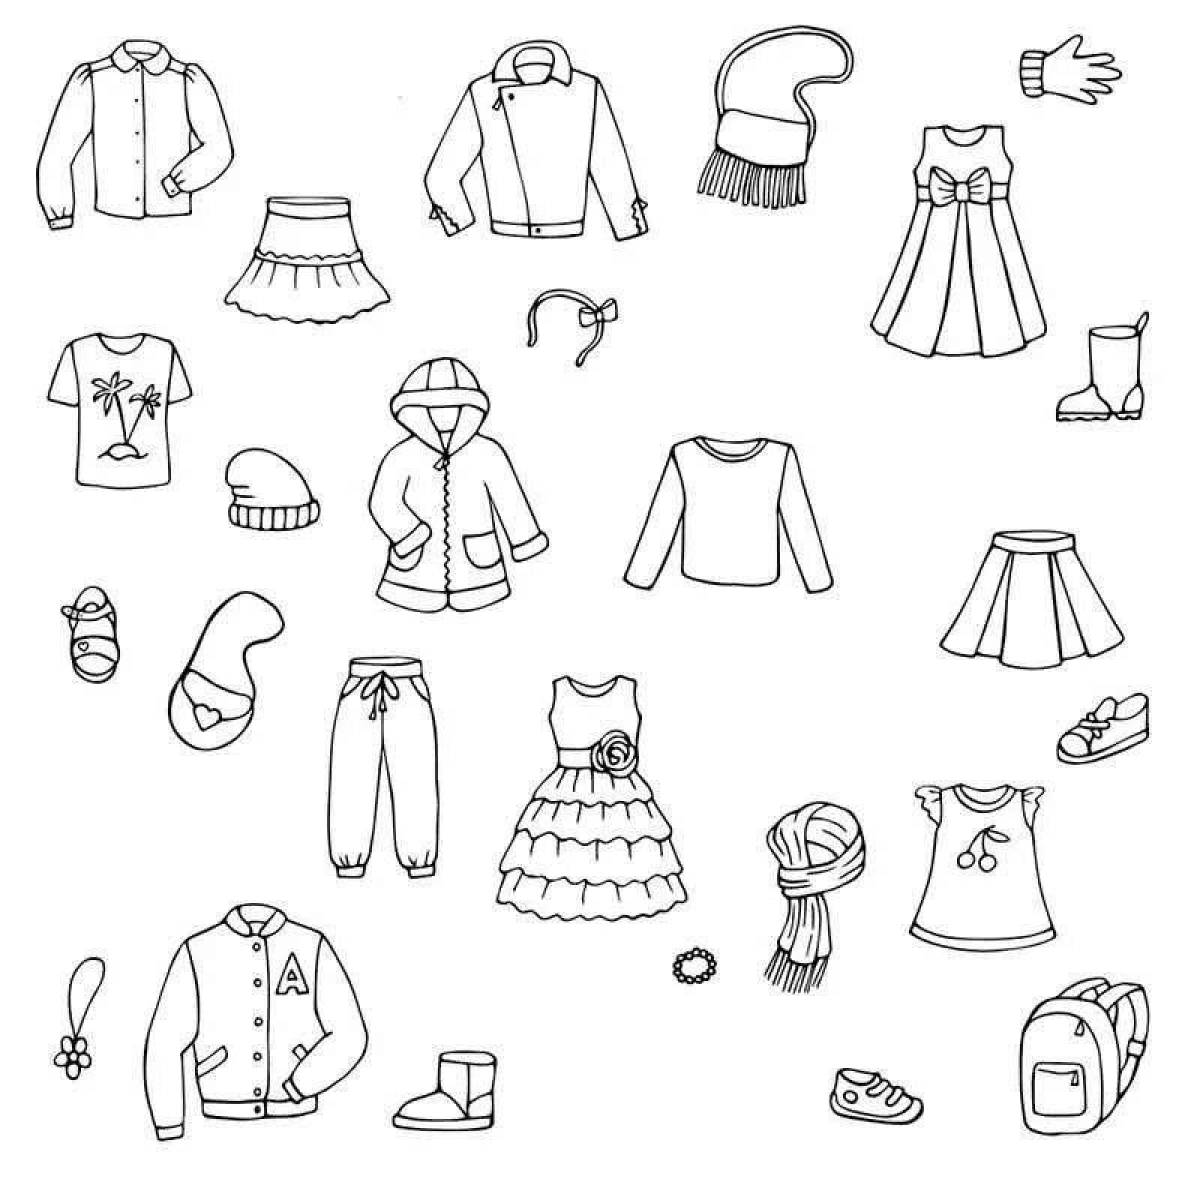 Colorful coloring page of clothes for 4-5 year olds